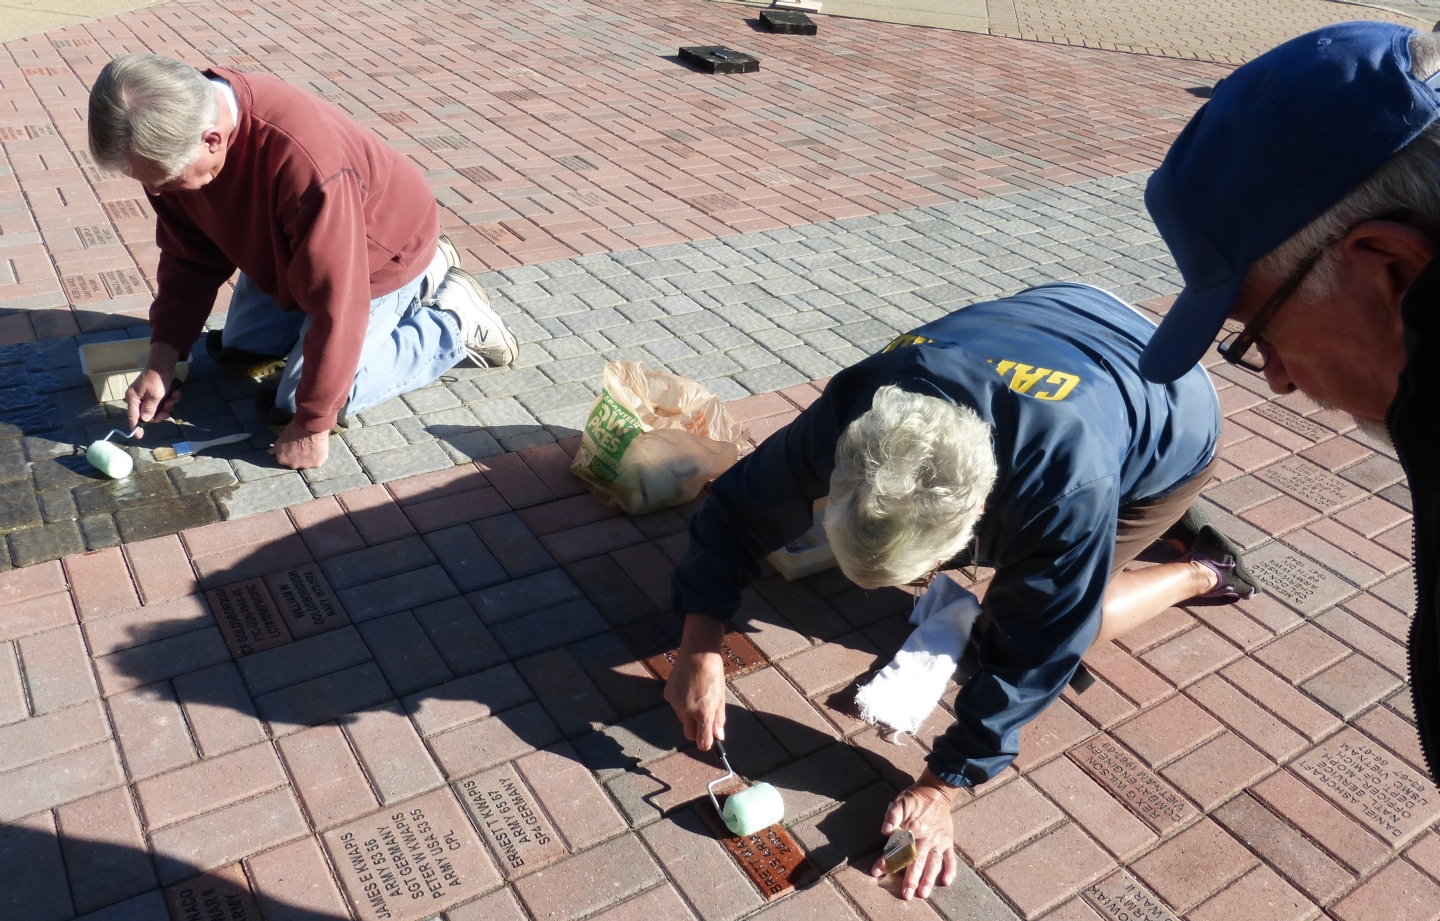 Fund raising pavers are sealed annually to preserve them.